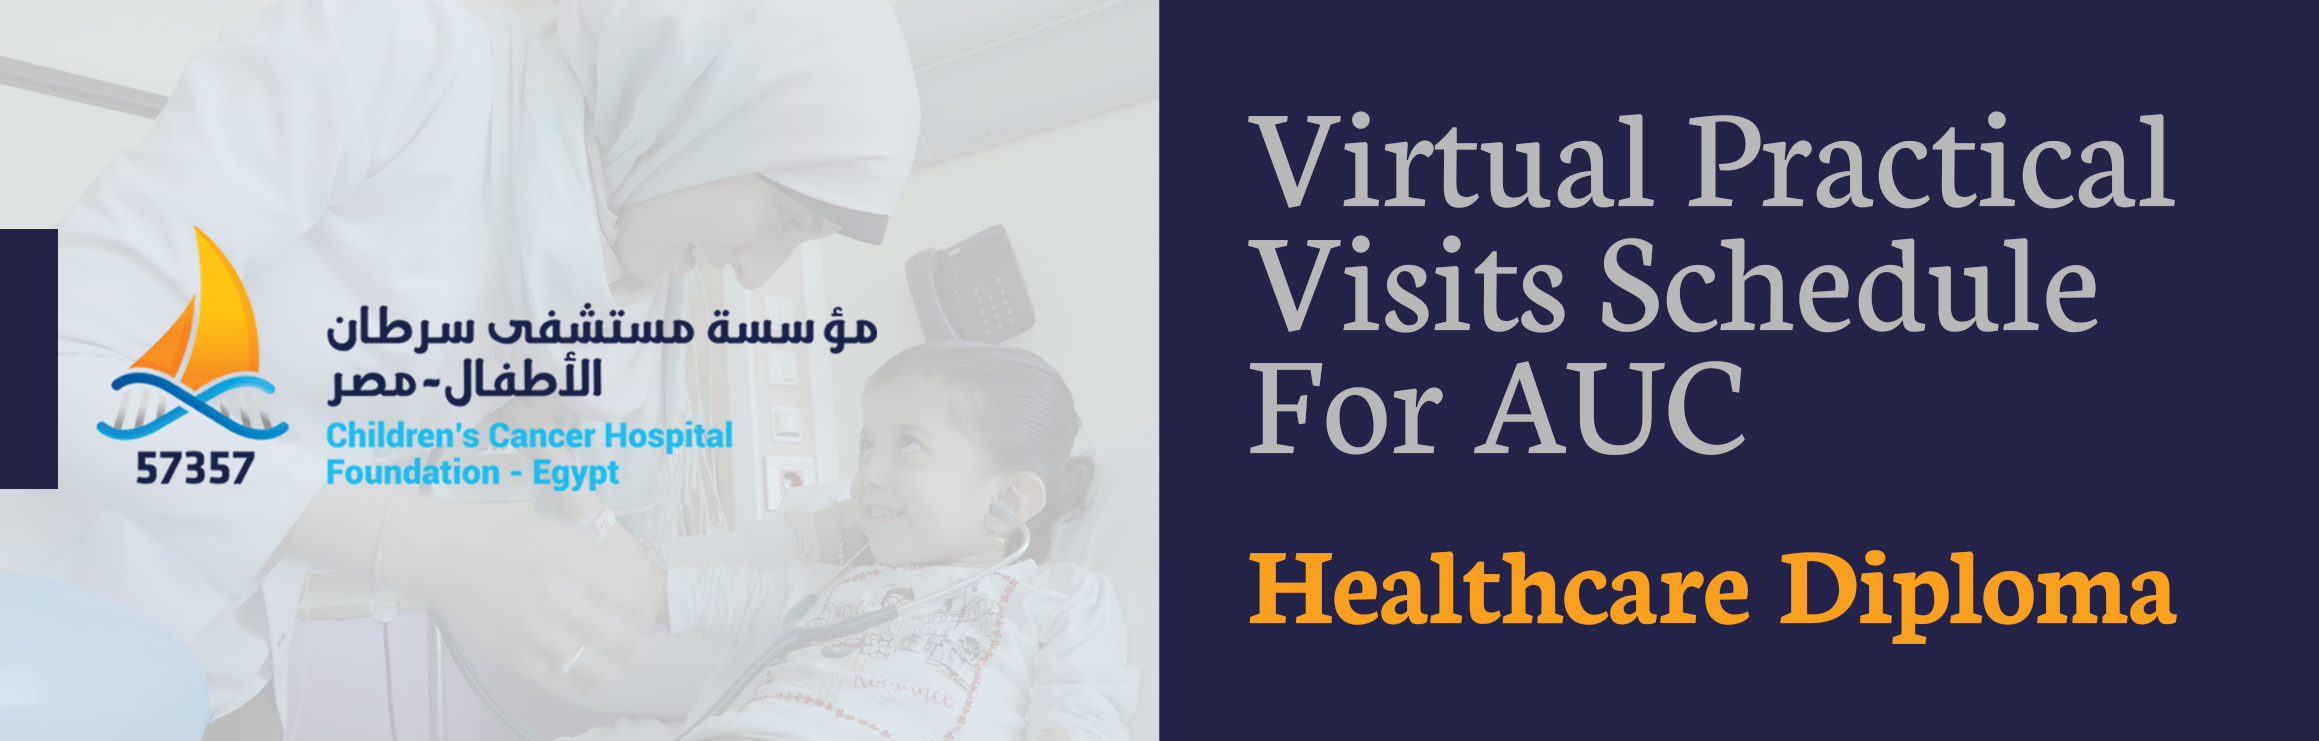 Virtual Practical Visits Schedule for AUC Healthcare Diploma (OE Run 2)